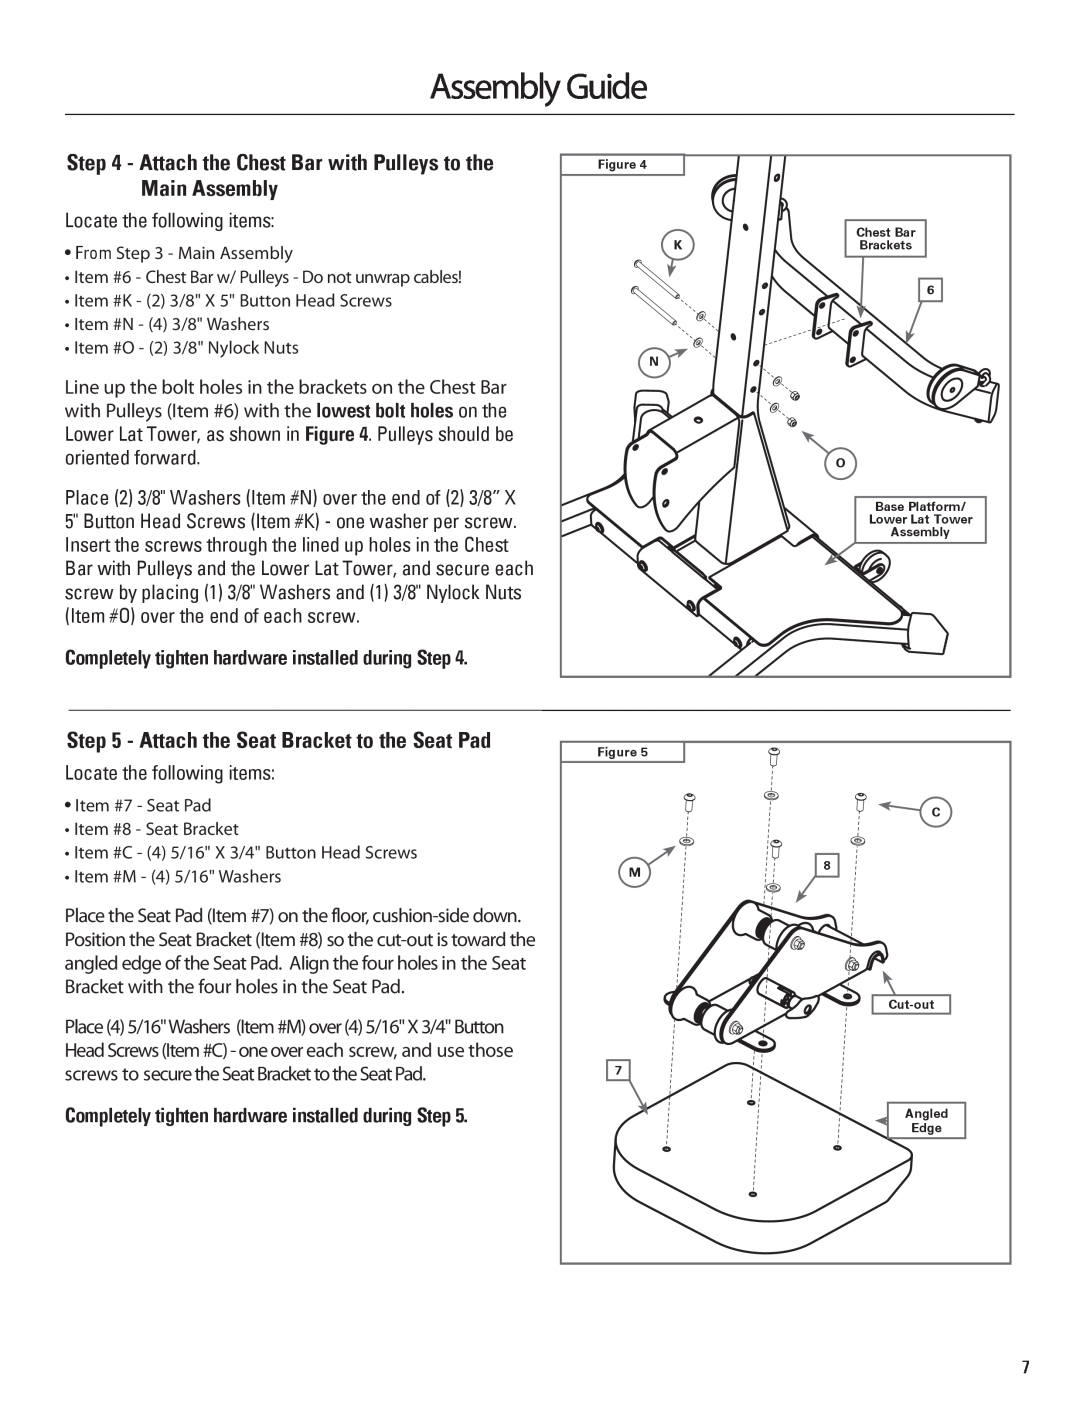 Bowflex 001-6961 manual Attach the Chest Bar with Pulleys to the, Main Assembly, Attach the Seat Bracket to the Seat Pad 